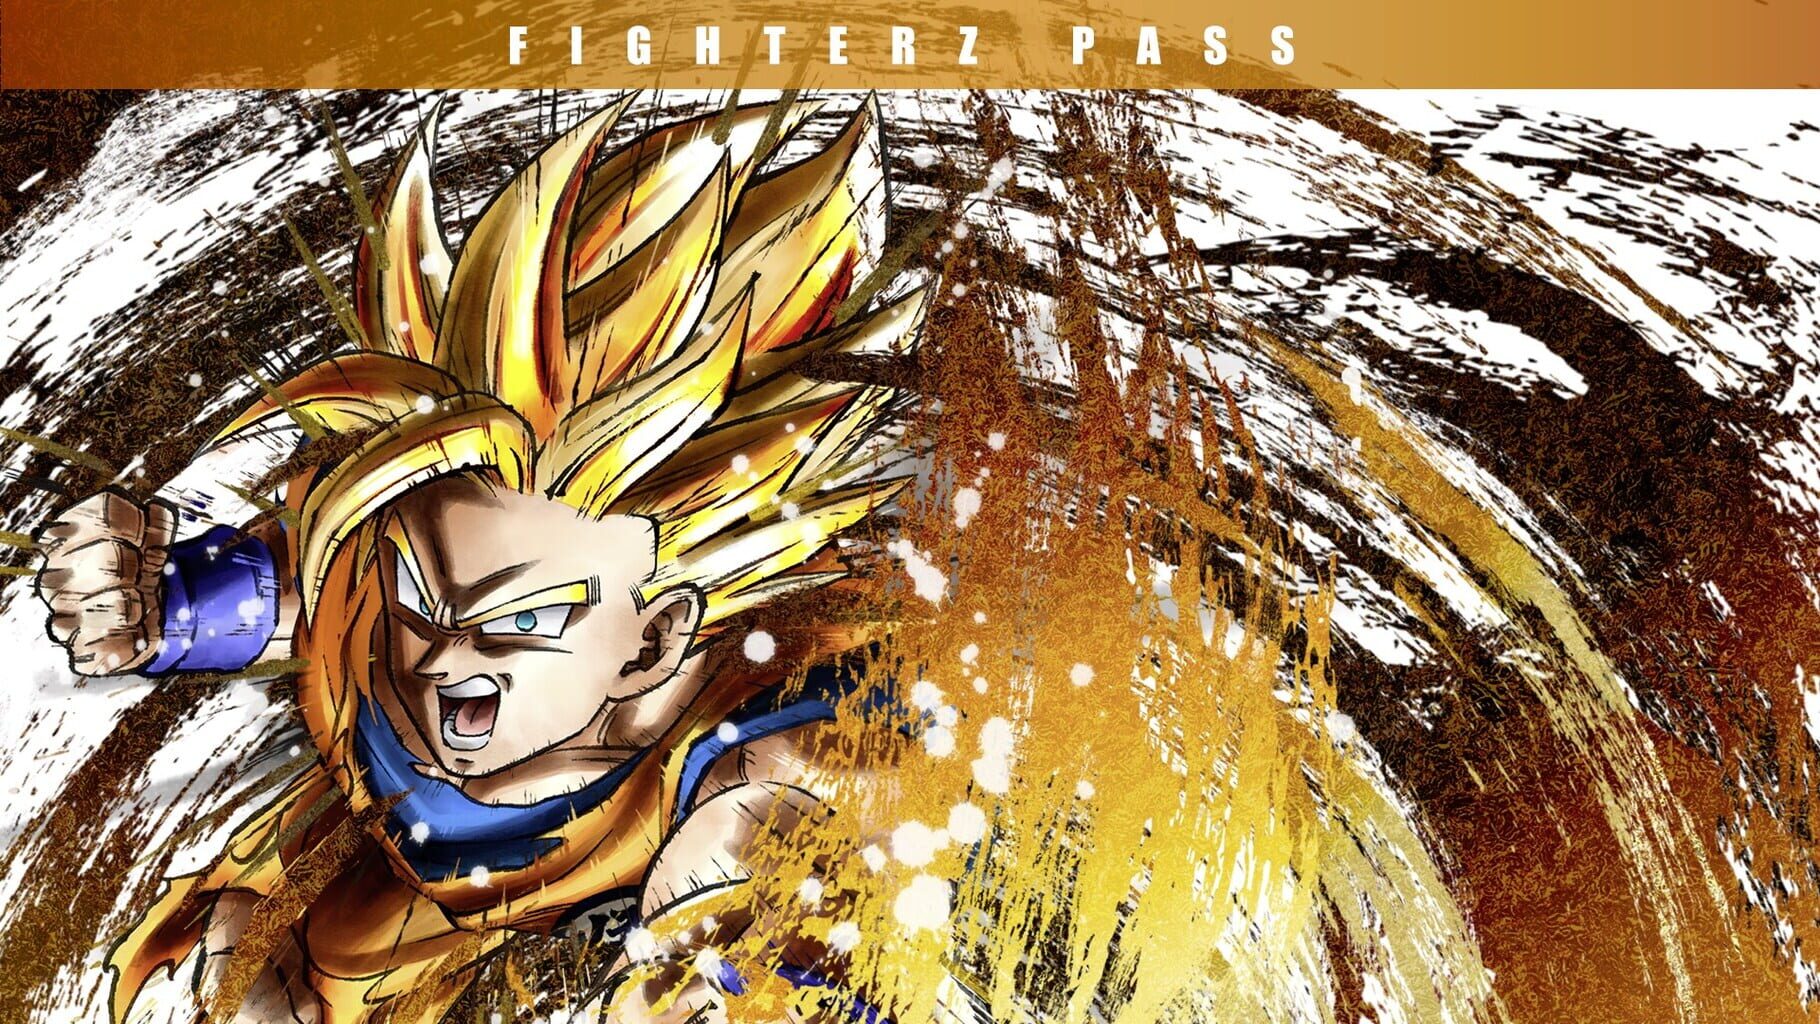 Dragon Ball FighterZ: FighterZ Pass Image